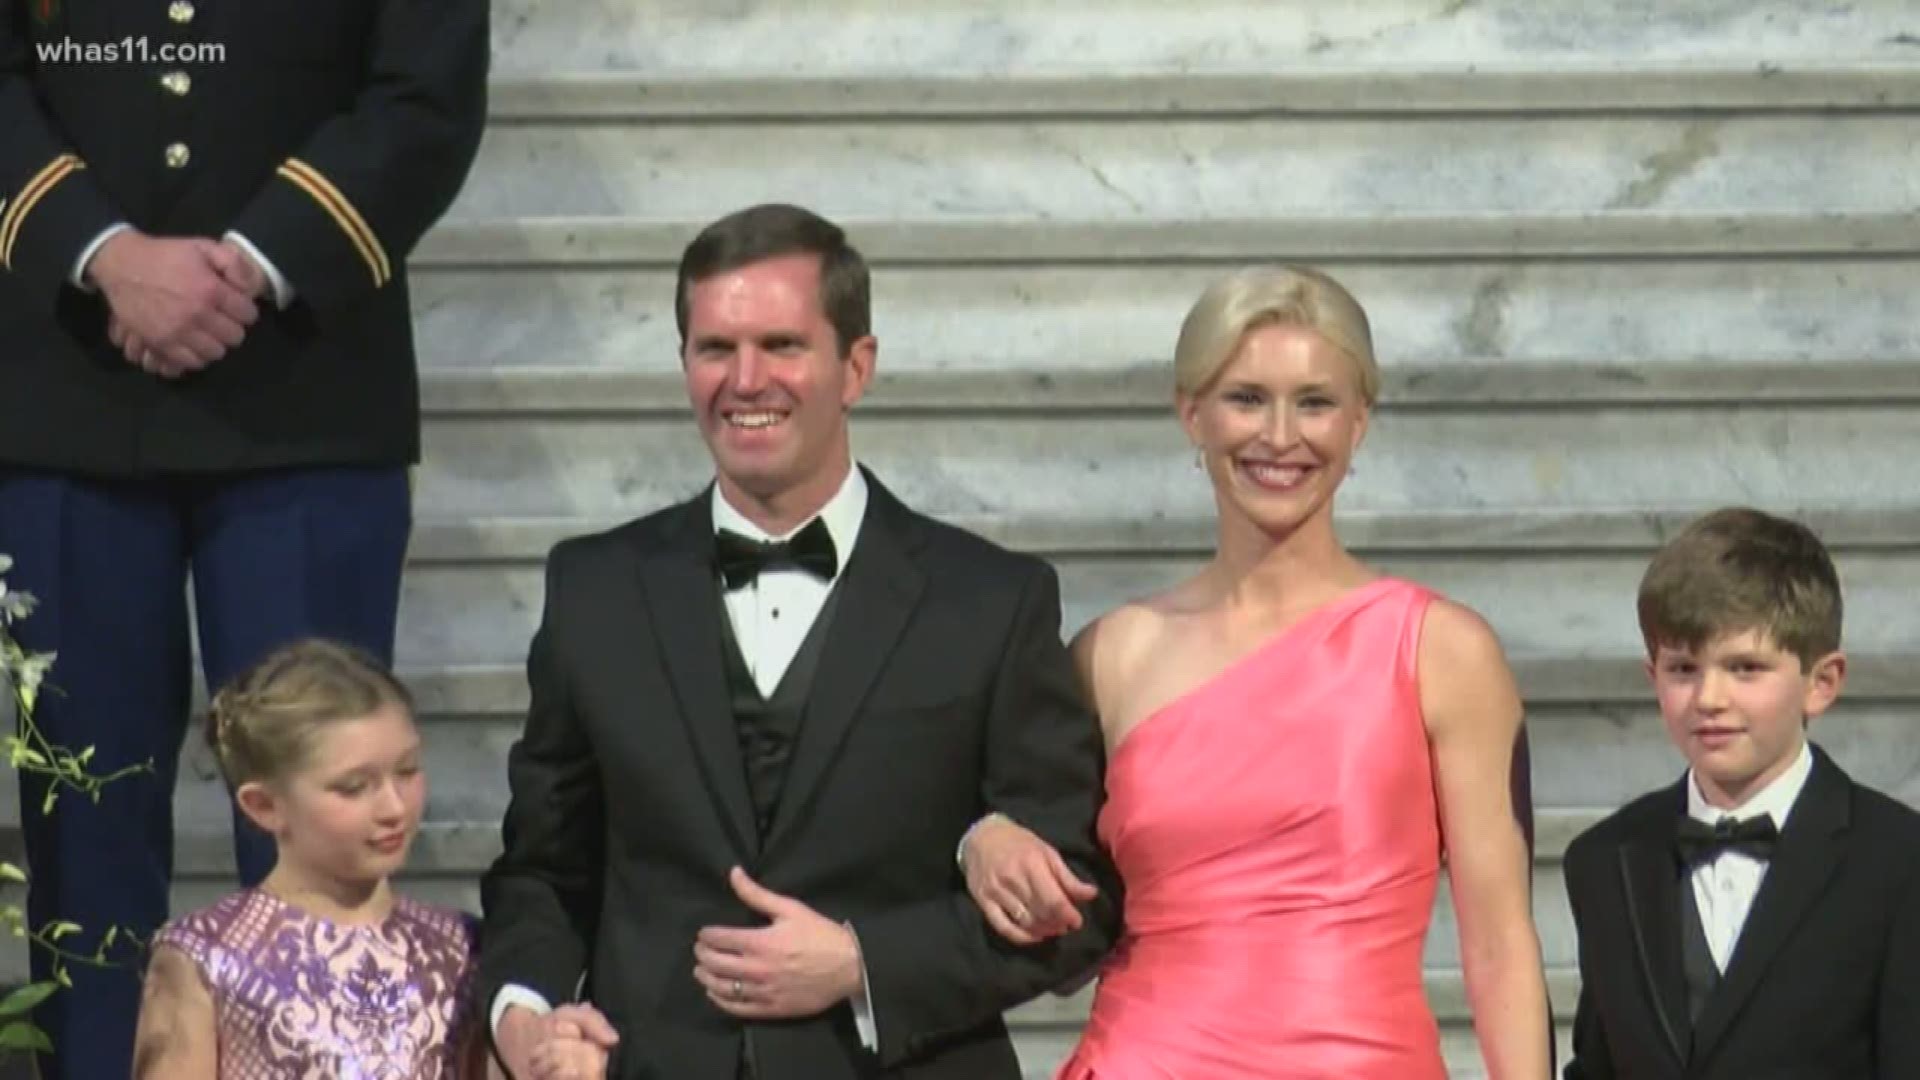 The NightTeam wraps up all the sights and sounds from the inauguration of new Kentucky Governor Andy Beshear.